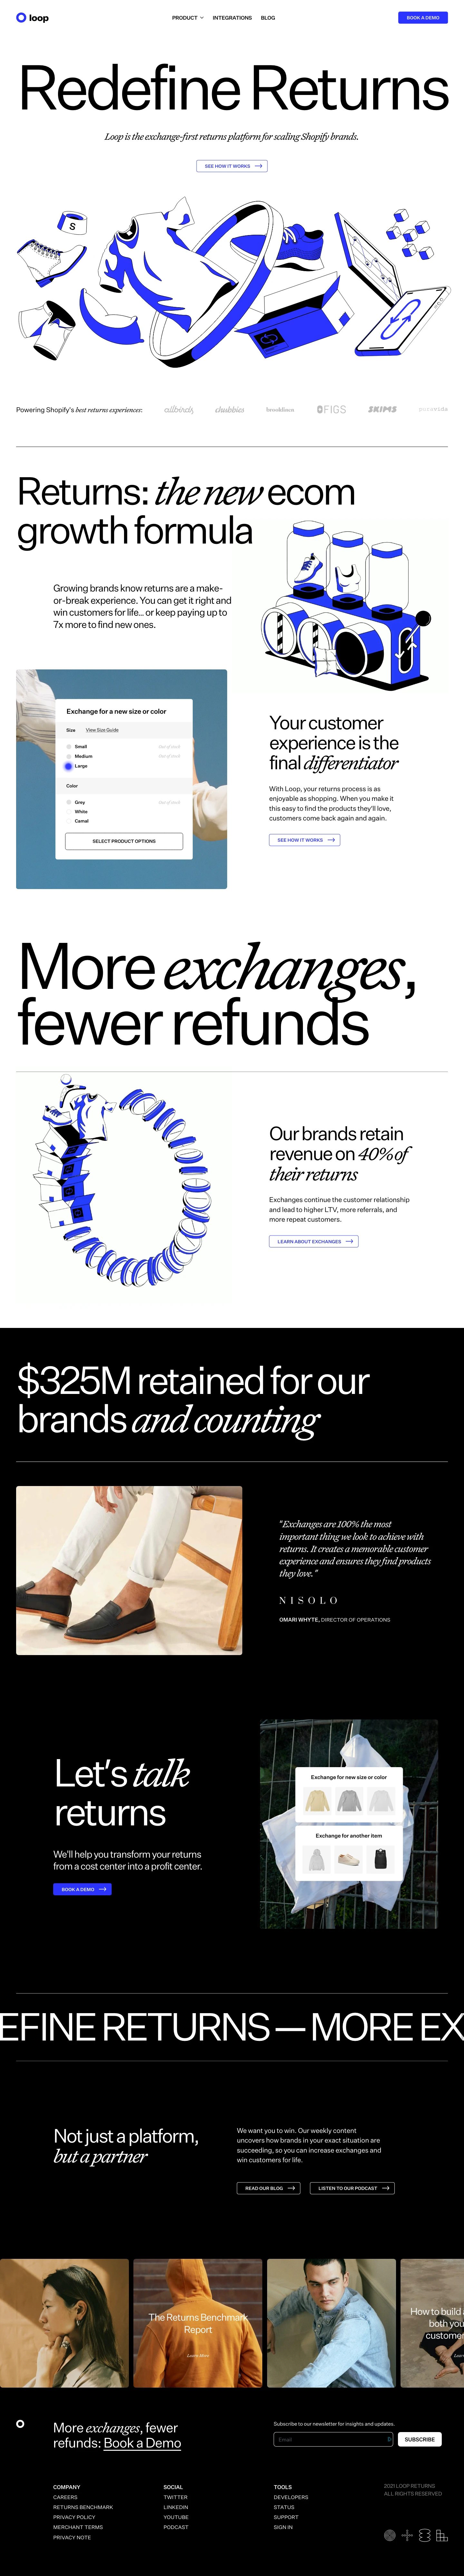 Loop Returns Landing Page Example: The returns app for Shopify's top brands. Loop improves retention by encouraging your customers to exchange rather than requesting a refund